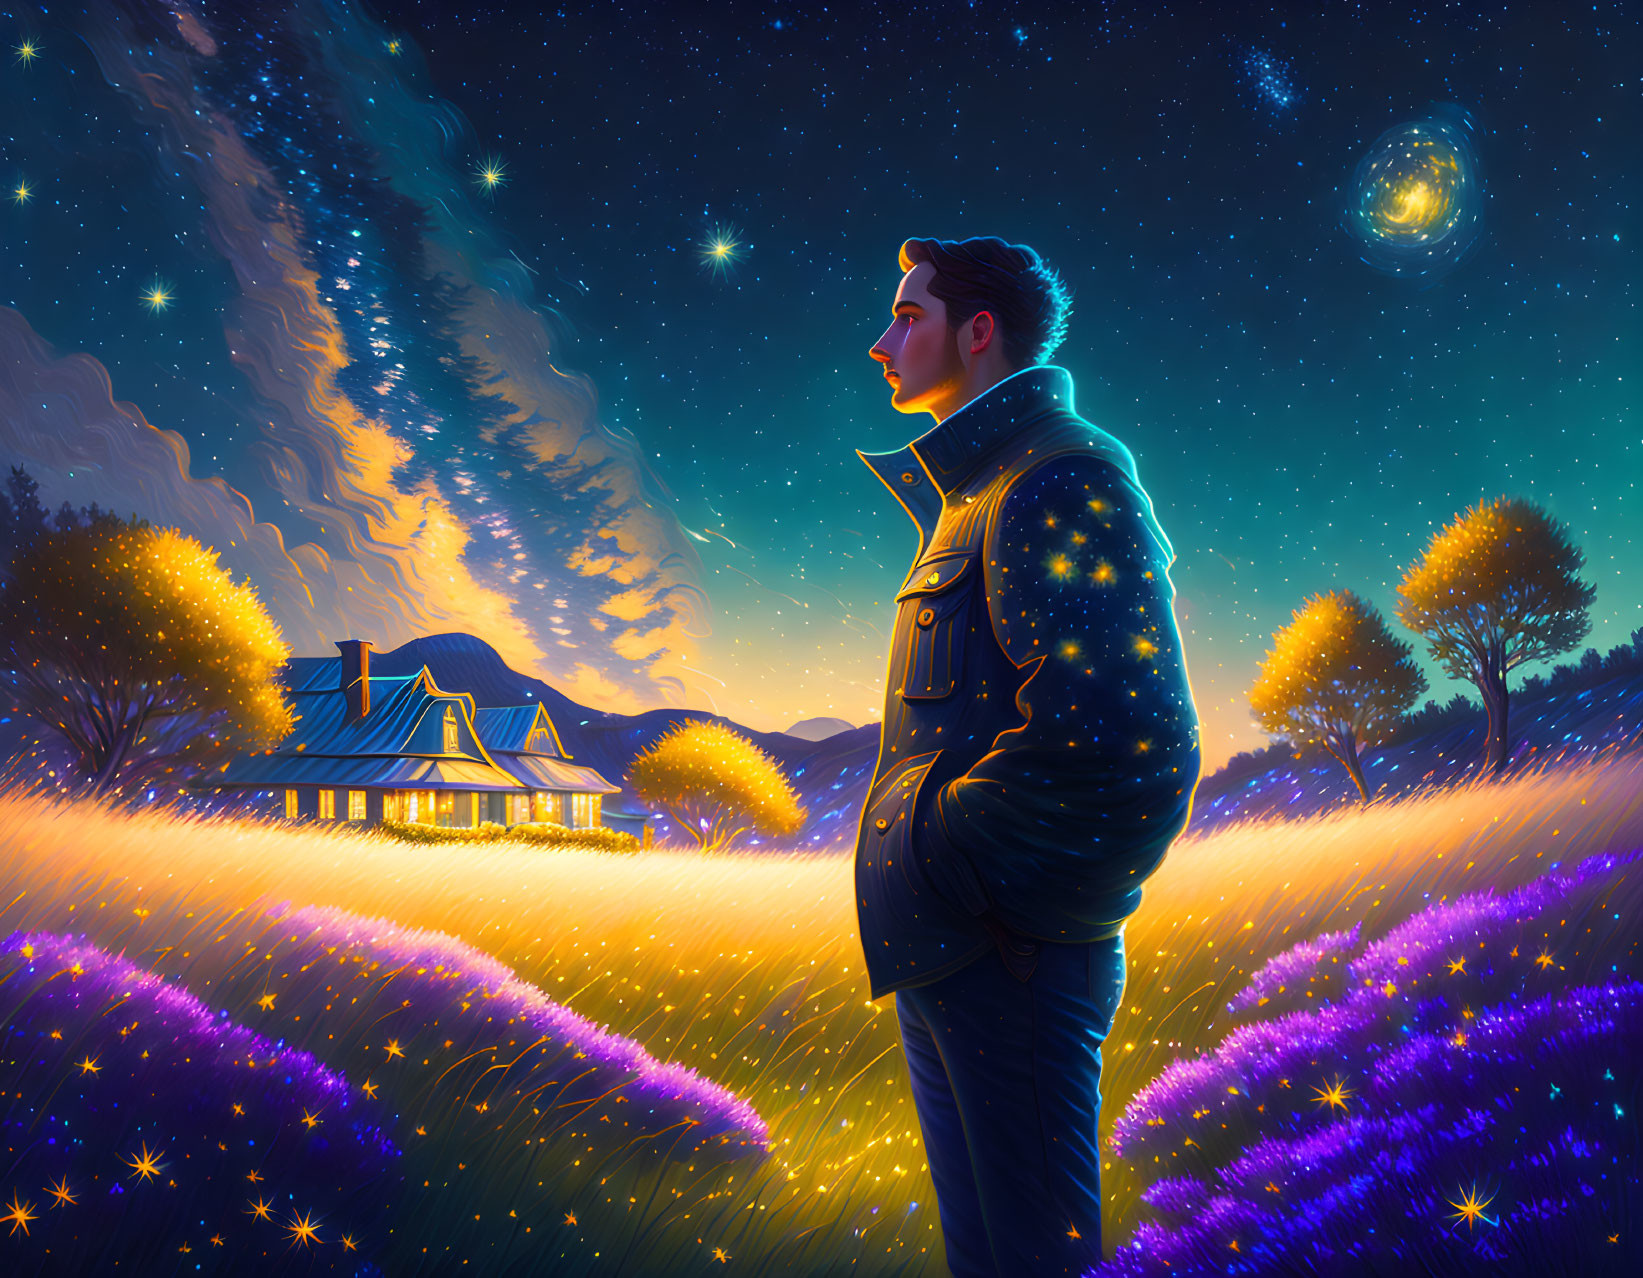 Man gazes at starlit field with comet above, cozy house in background